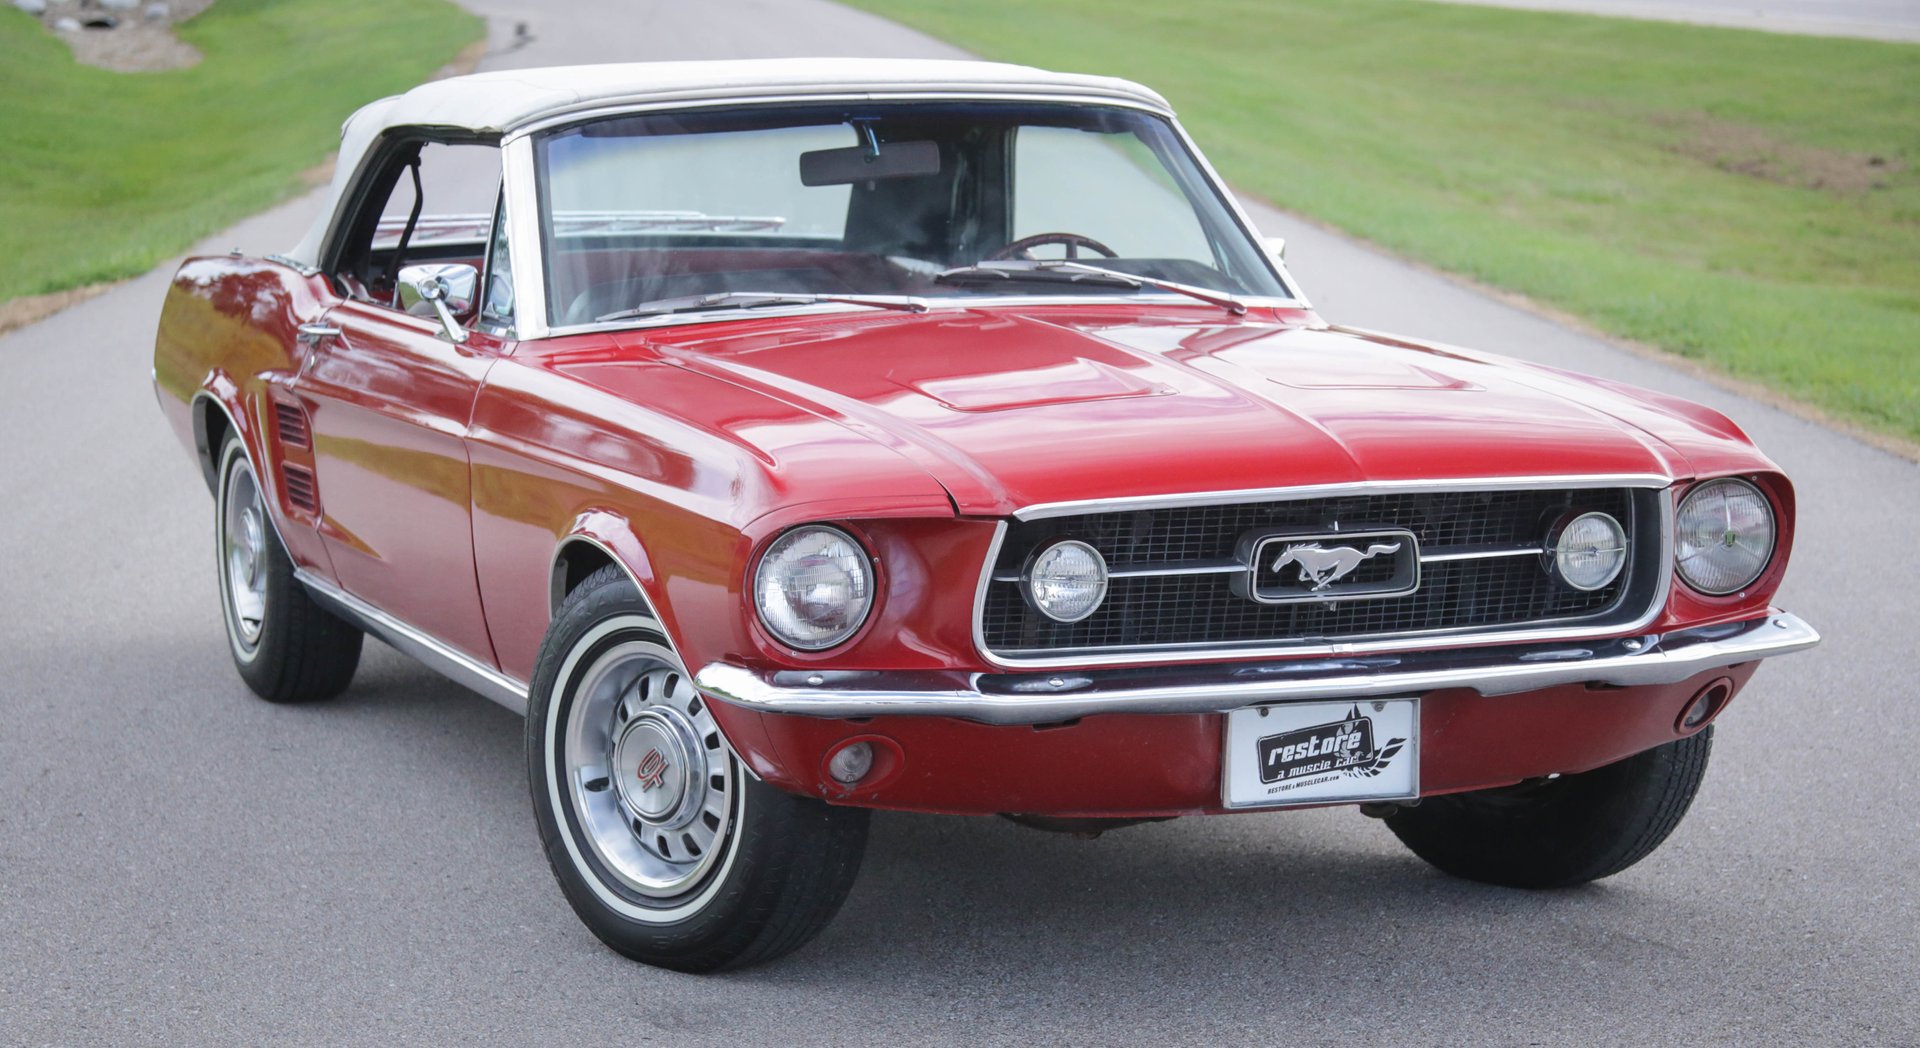 Red 1967 Ford Mustang